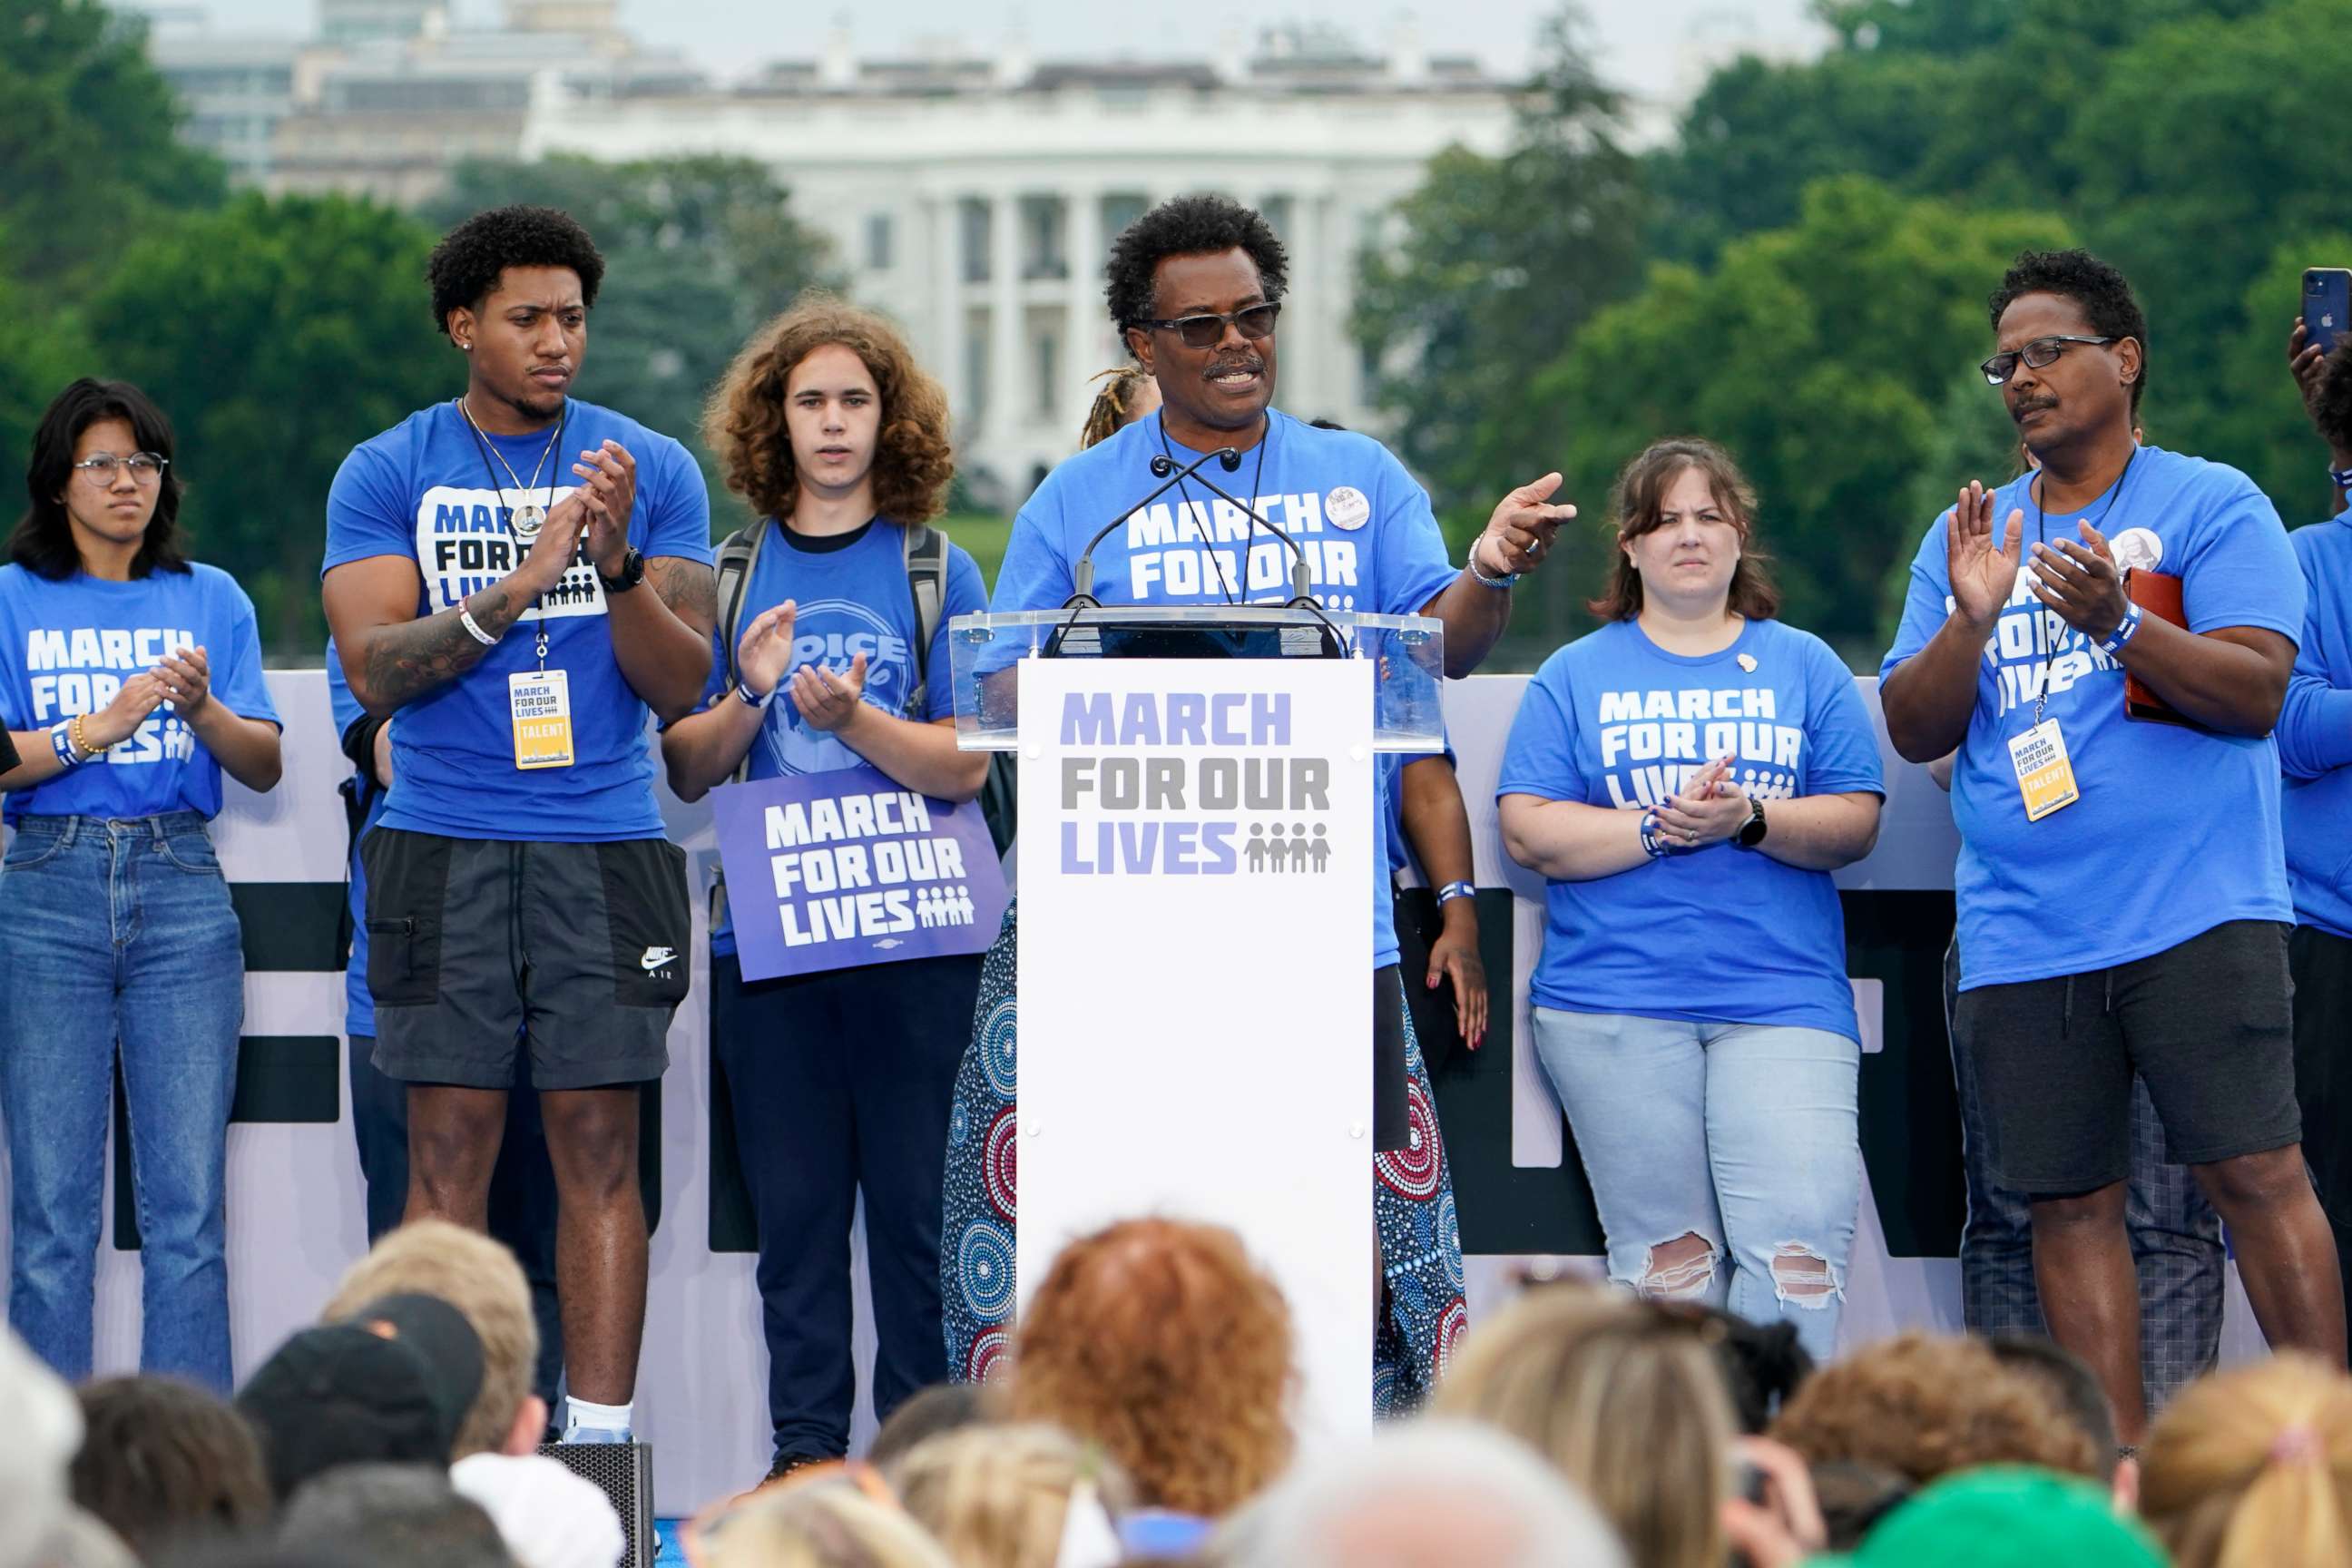 PHOTO: With the White House in the background, Garnell Whitfield, Jr., whose mother, Ruth Whitfield, was killed in the Buffalo Tops supermarket mass shooting, speaks during the second March for Our Lives rally in support of gun control, June 11, 2022.